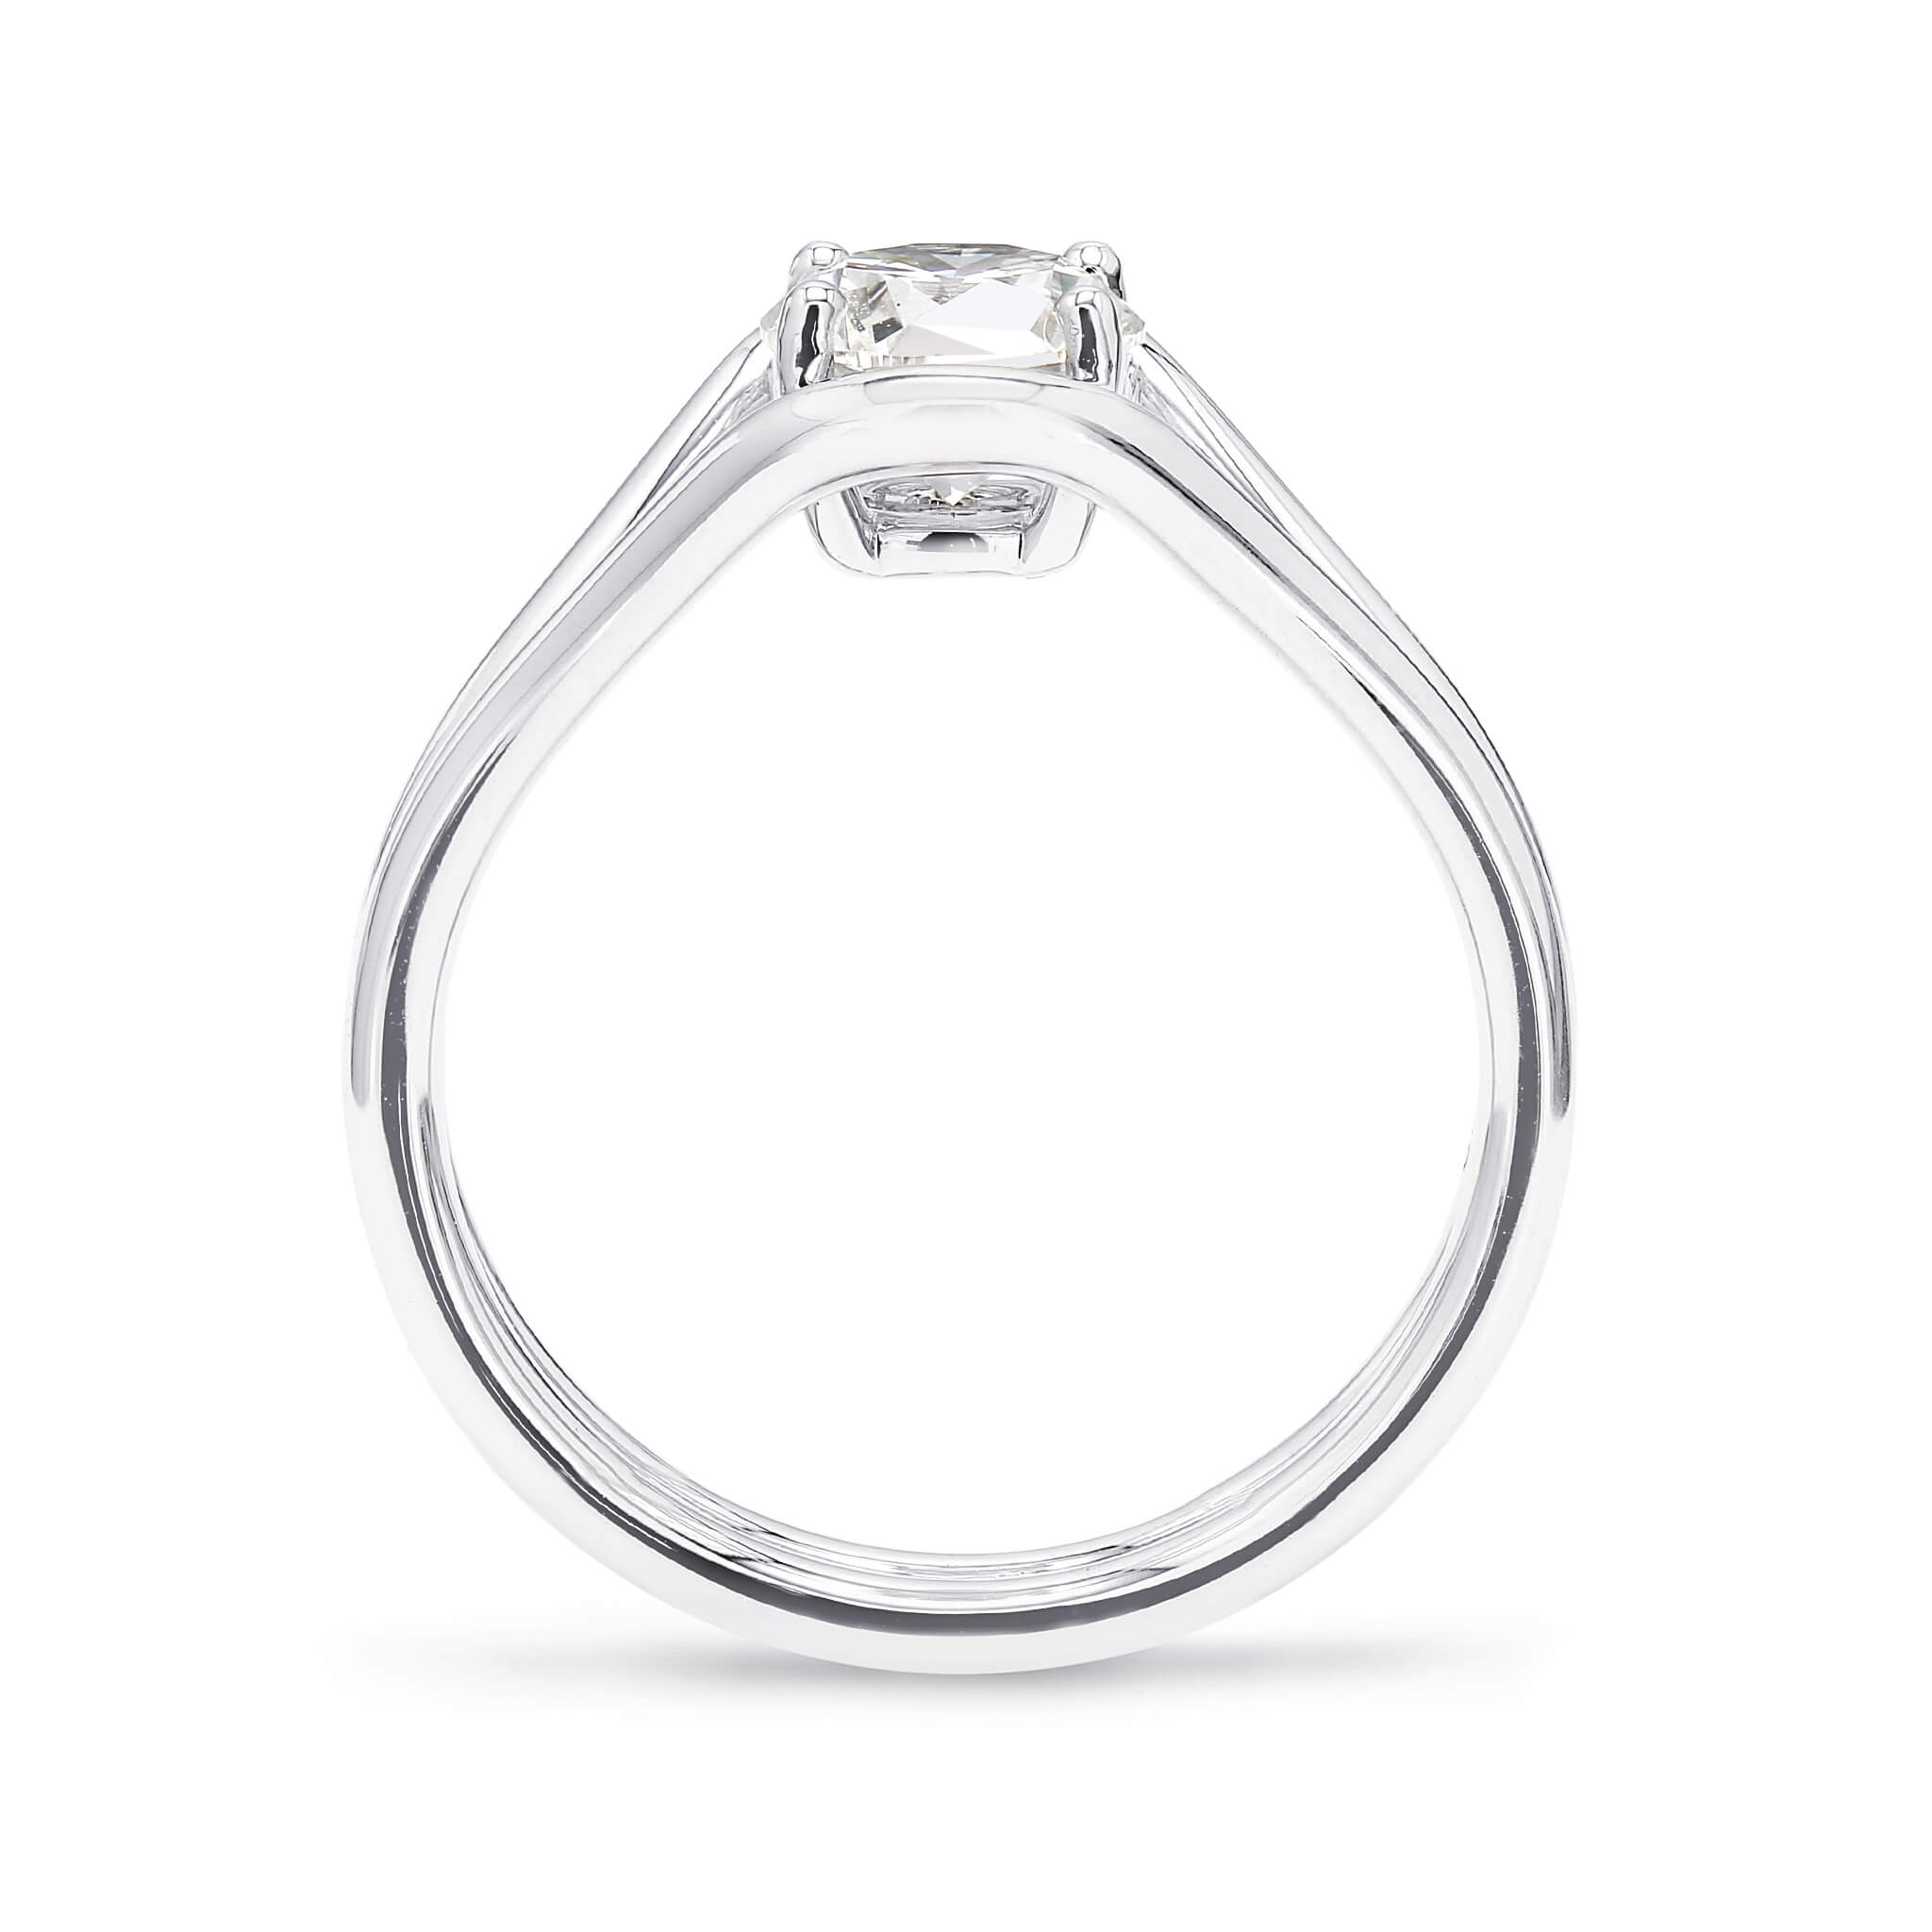 Shimansky - Double Silhouette Diamond Engagement Ring 0.70ct Crafted in 18K White Gold